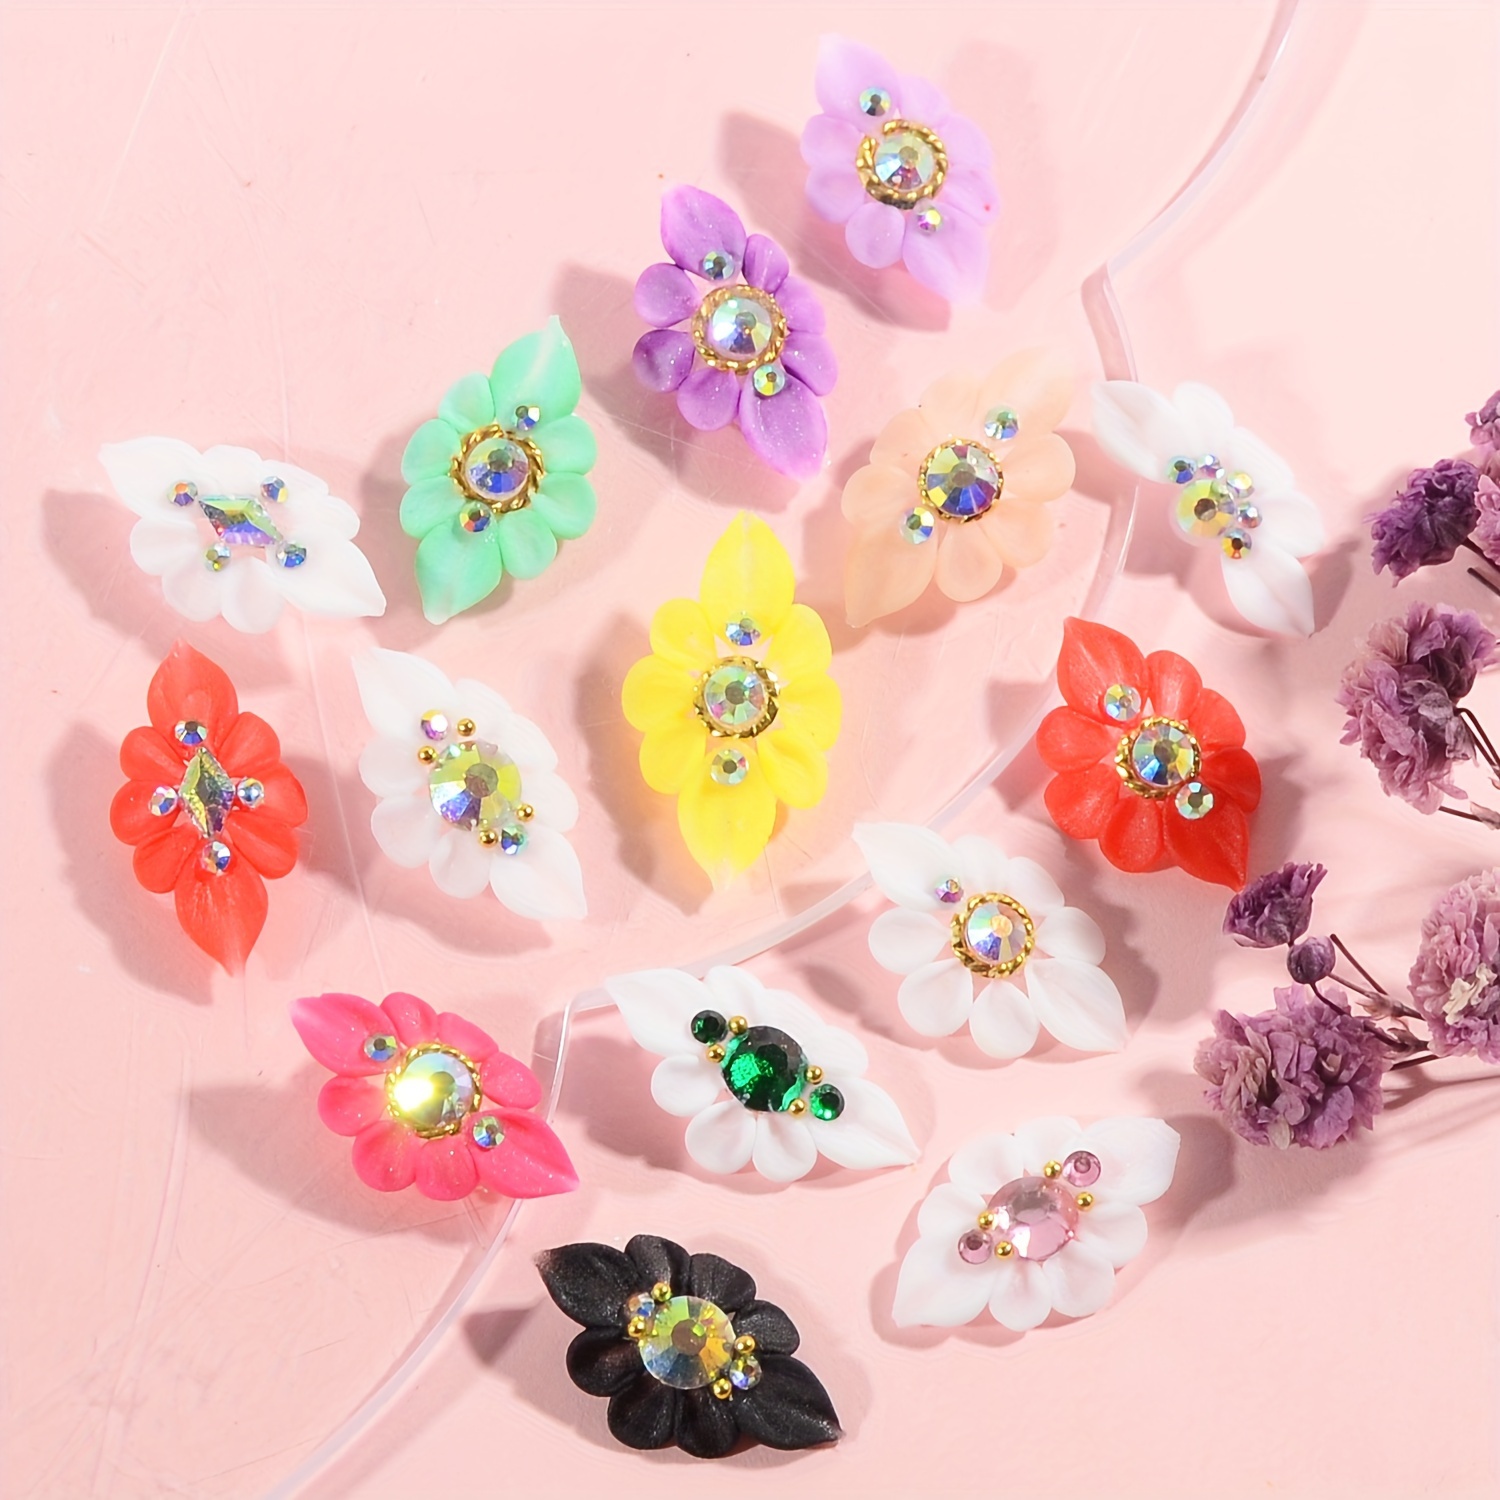 

30pcs Handcrafted Acrylic Flower Nail Charms Set - Mixed 15 Designs With Rhinestones & Crystals, Scent-free Nail Art Decorations For Women And Girls Nail Charms And Accessories Nail Art Charms